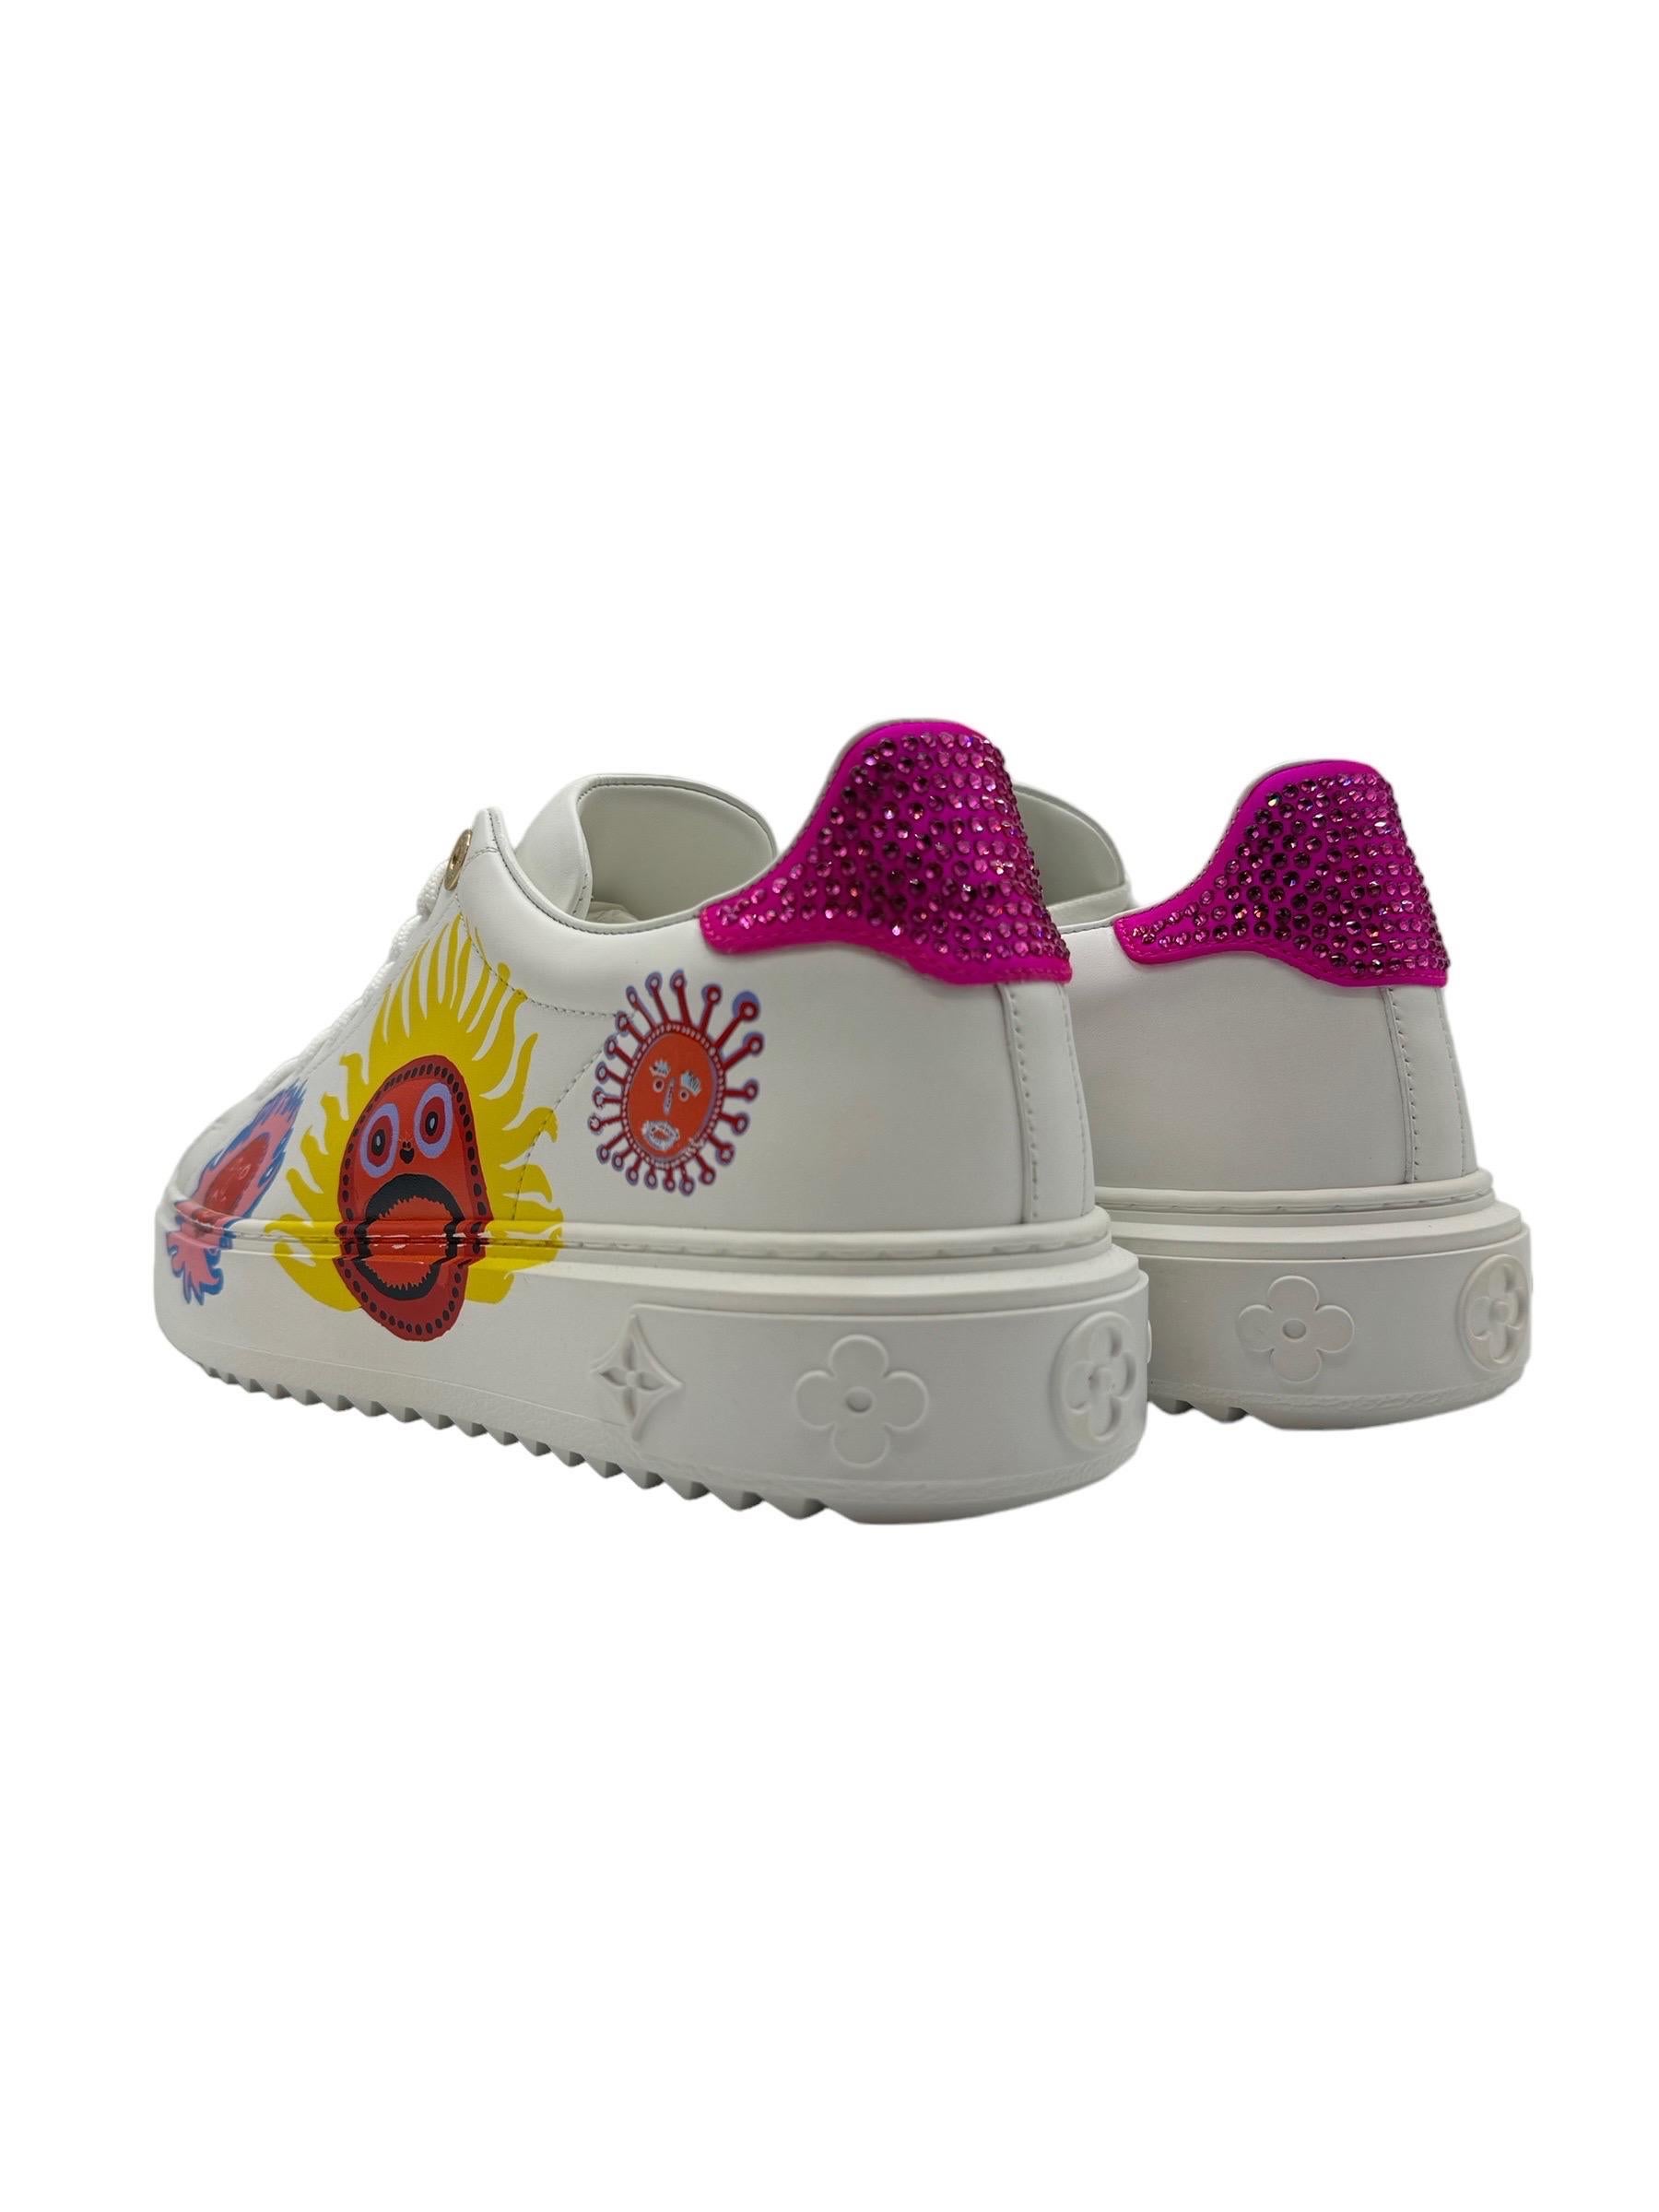 Sneakers Louis Vuitton X Yayoi Kusama Time Out For Sale 2